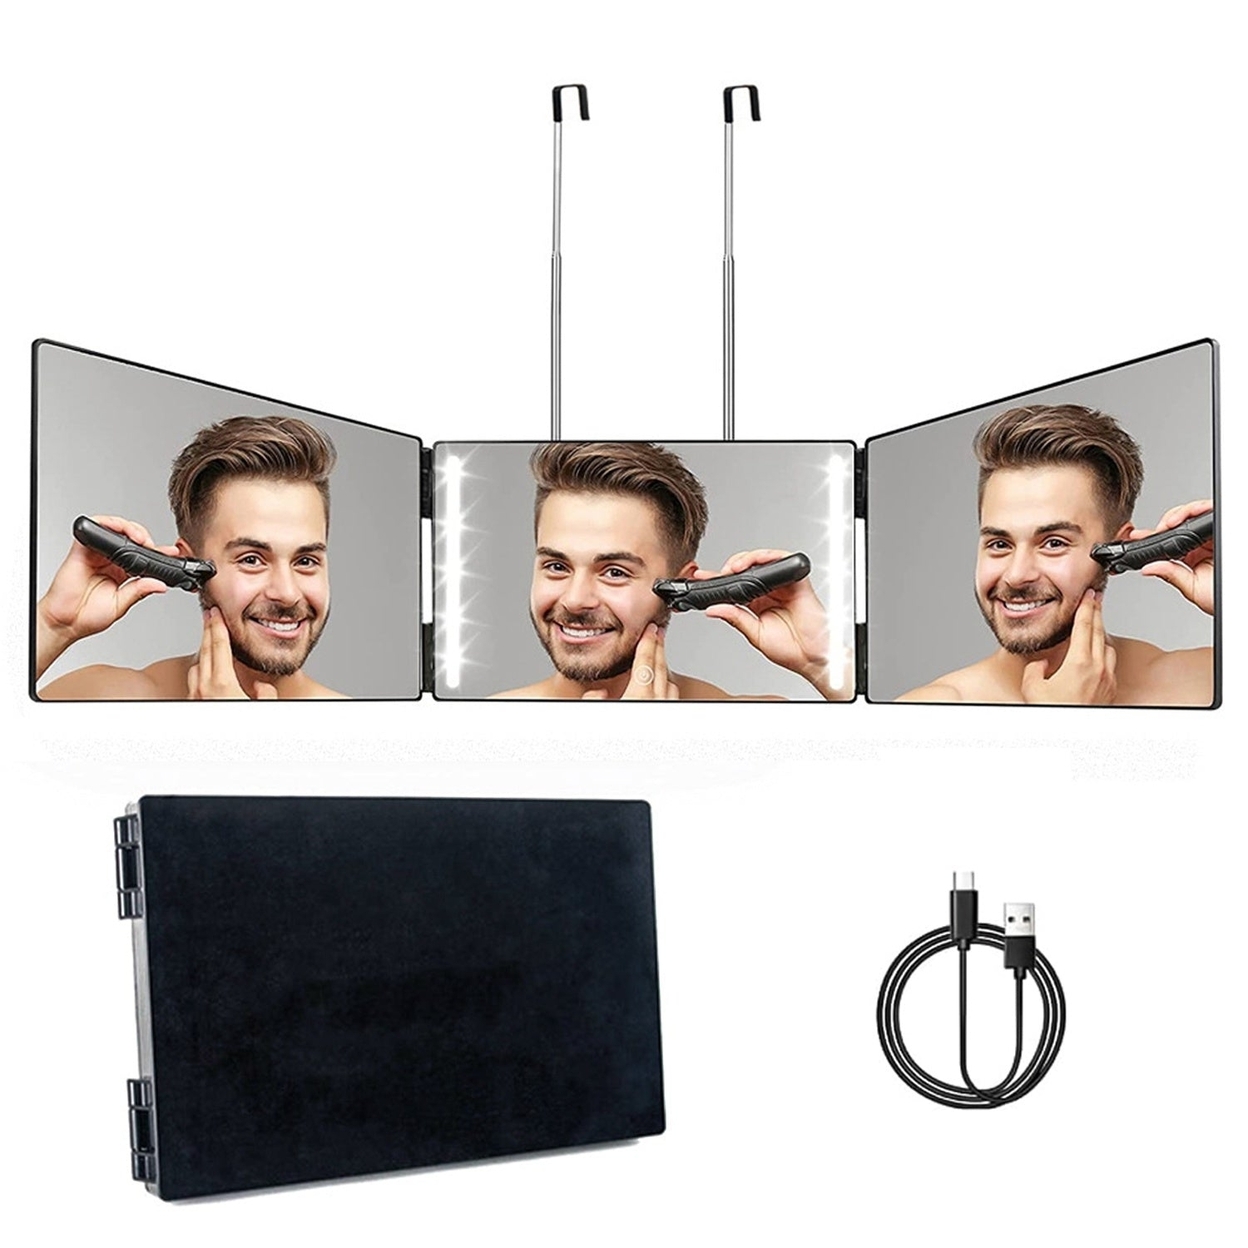 Dsermall 3 Way Mirror with LED Telescopic Hanger Tri-fold Mirror Personal Makeup Mirror with Micro USB Cable for Self Shaving Hair